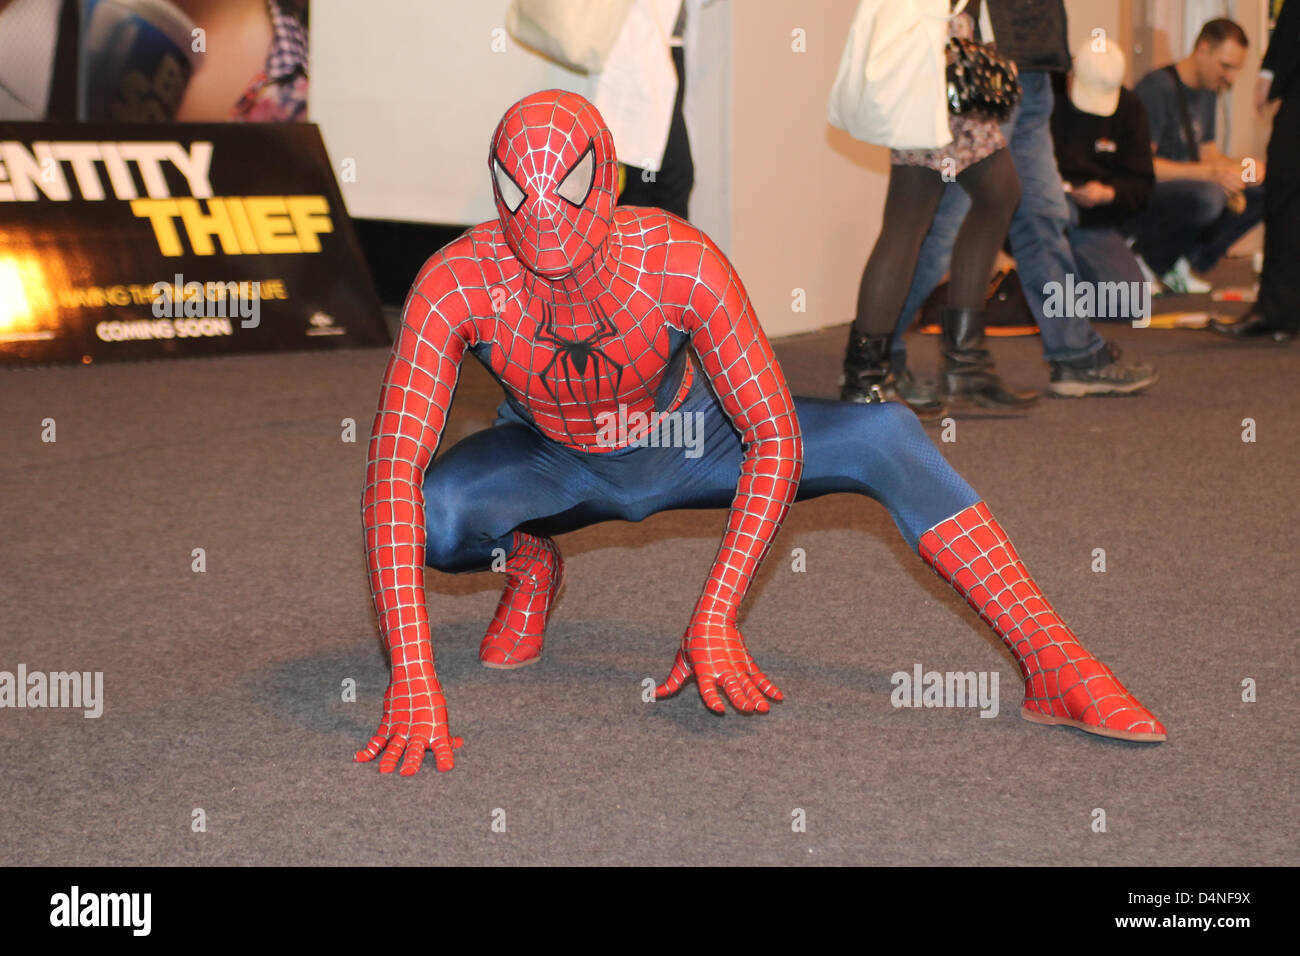 Birmingham, UK. 16th March 2013. Cosplayer dressed as Spiderman poses for shots at Birmingham MCM Expo. Stock Photo